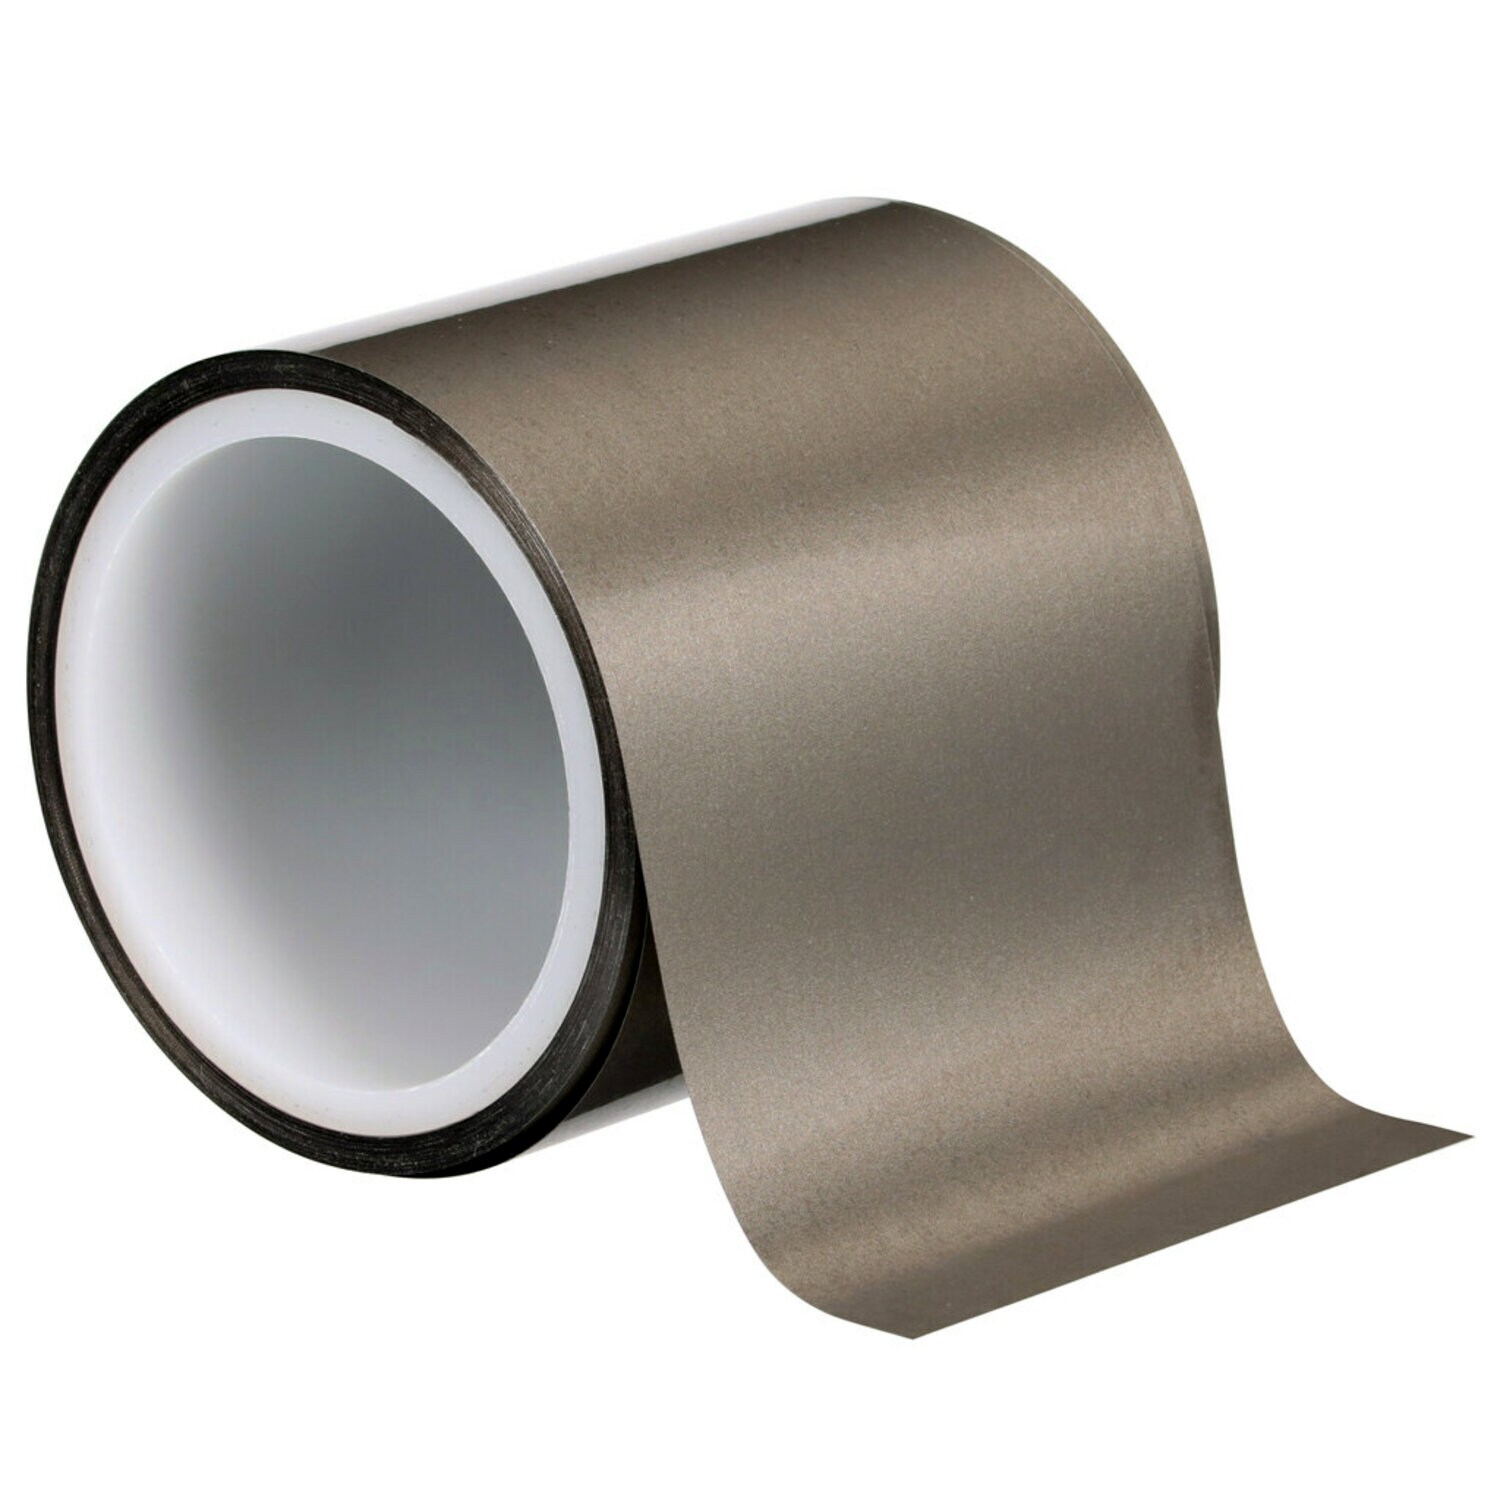 7100313611 - 3M Electrically Conductive Single-Sided Tape 5113SFT-50, 500 mm x 30 m, 1 Roll/Case